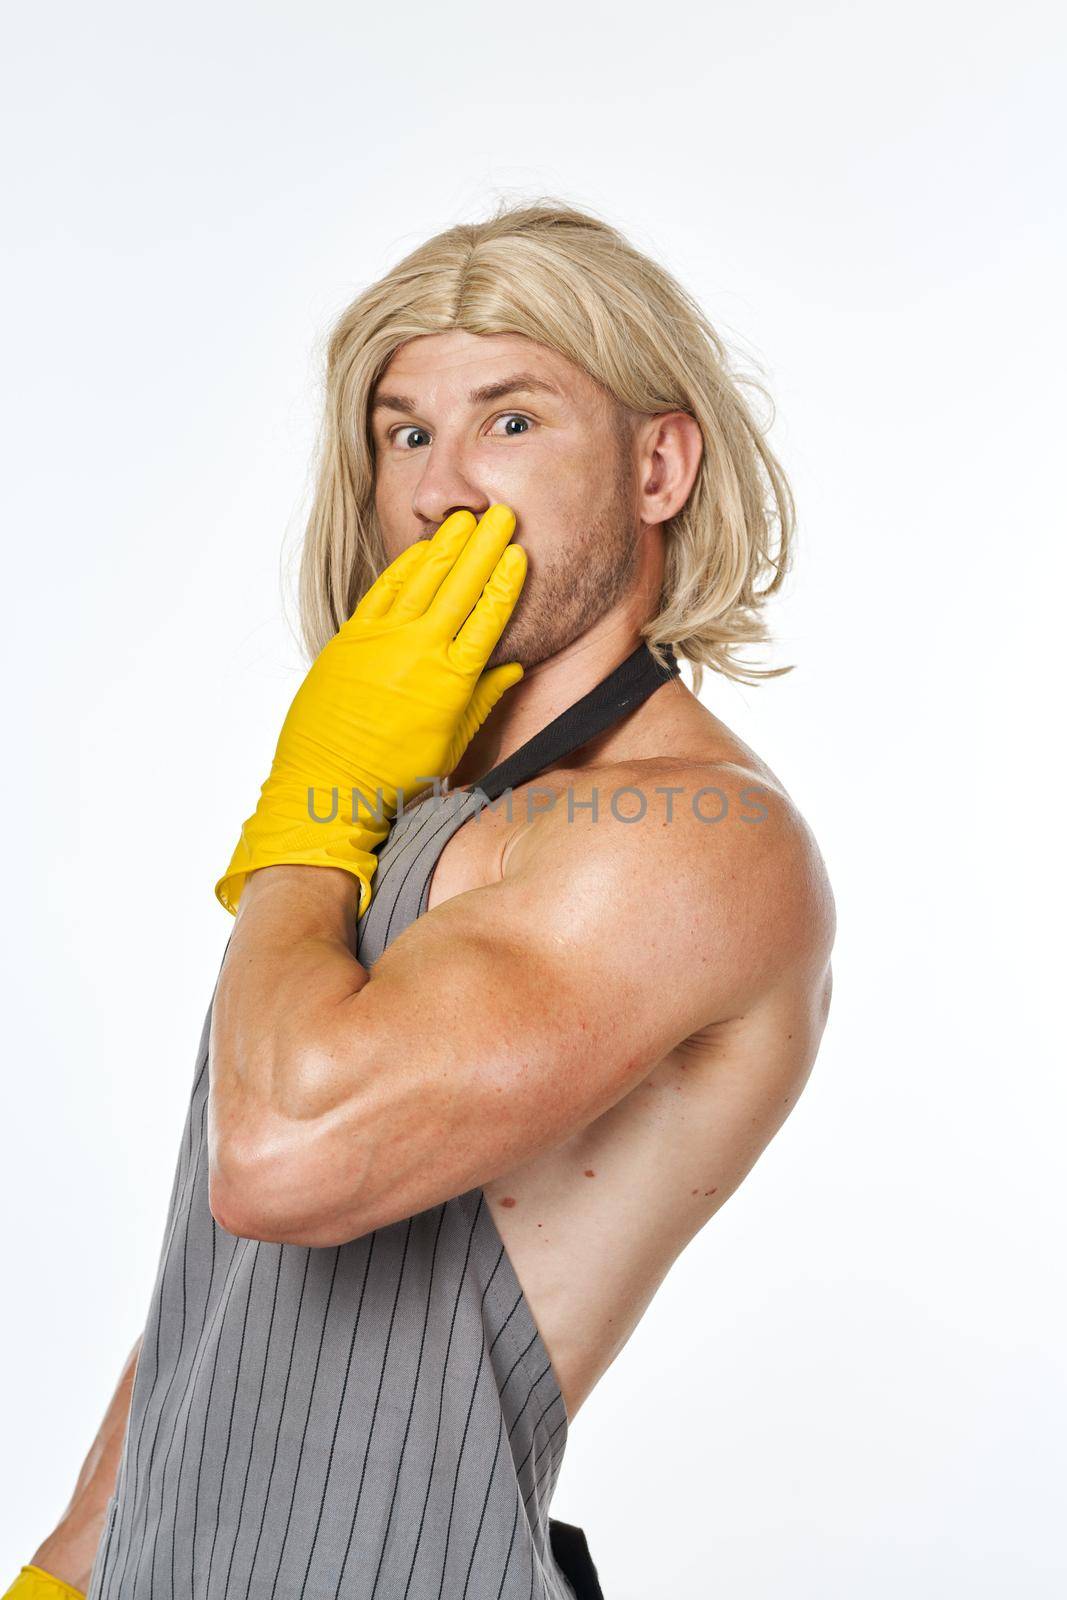 man in yellow rubber gloves in a woman's wig cleaning posing. High quality photo